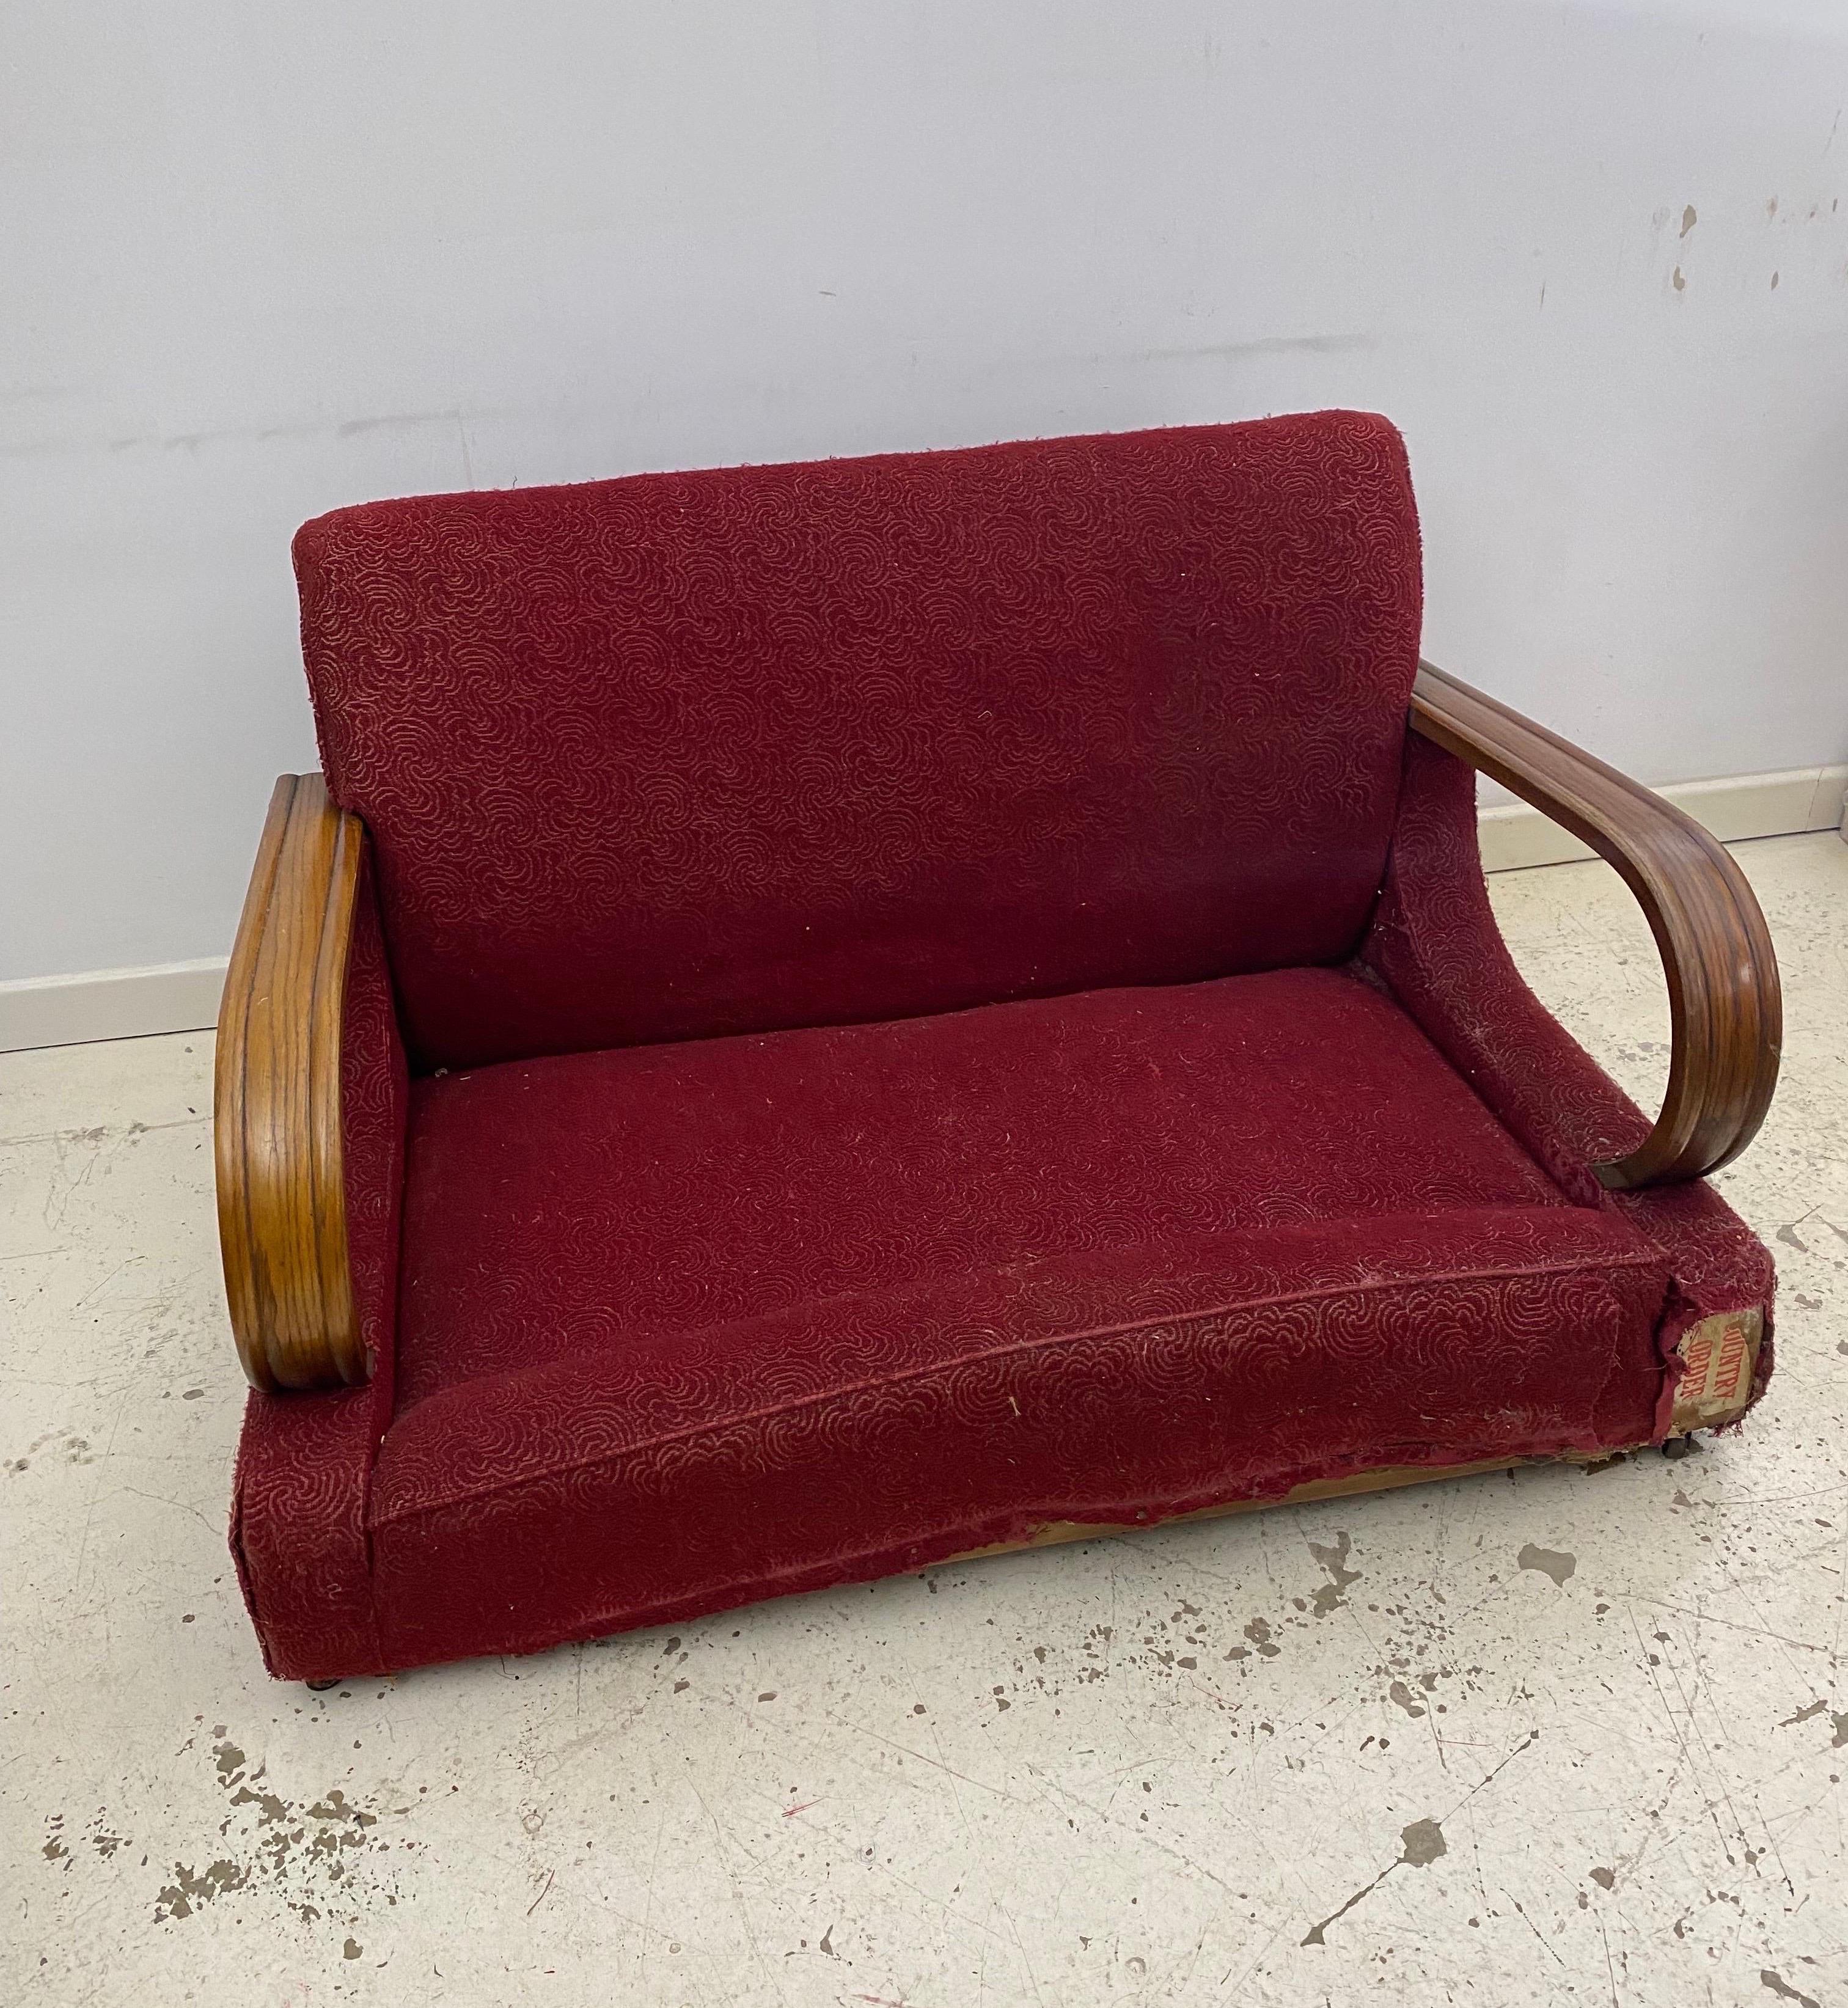 Tissu Art Deco 1940s Red Two Seater Distressed Sofa Restoration Project As Seen Poirot en vente